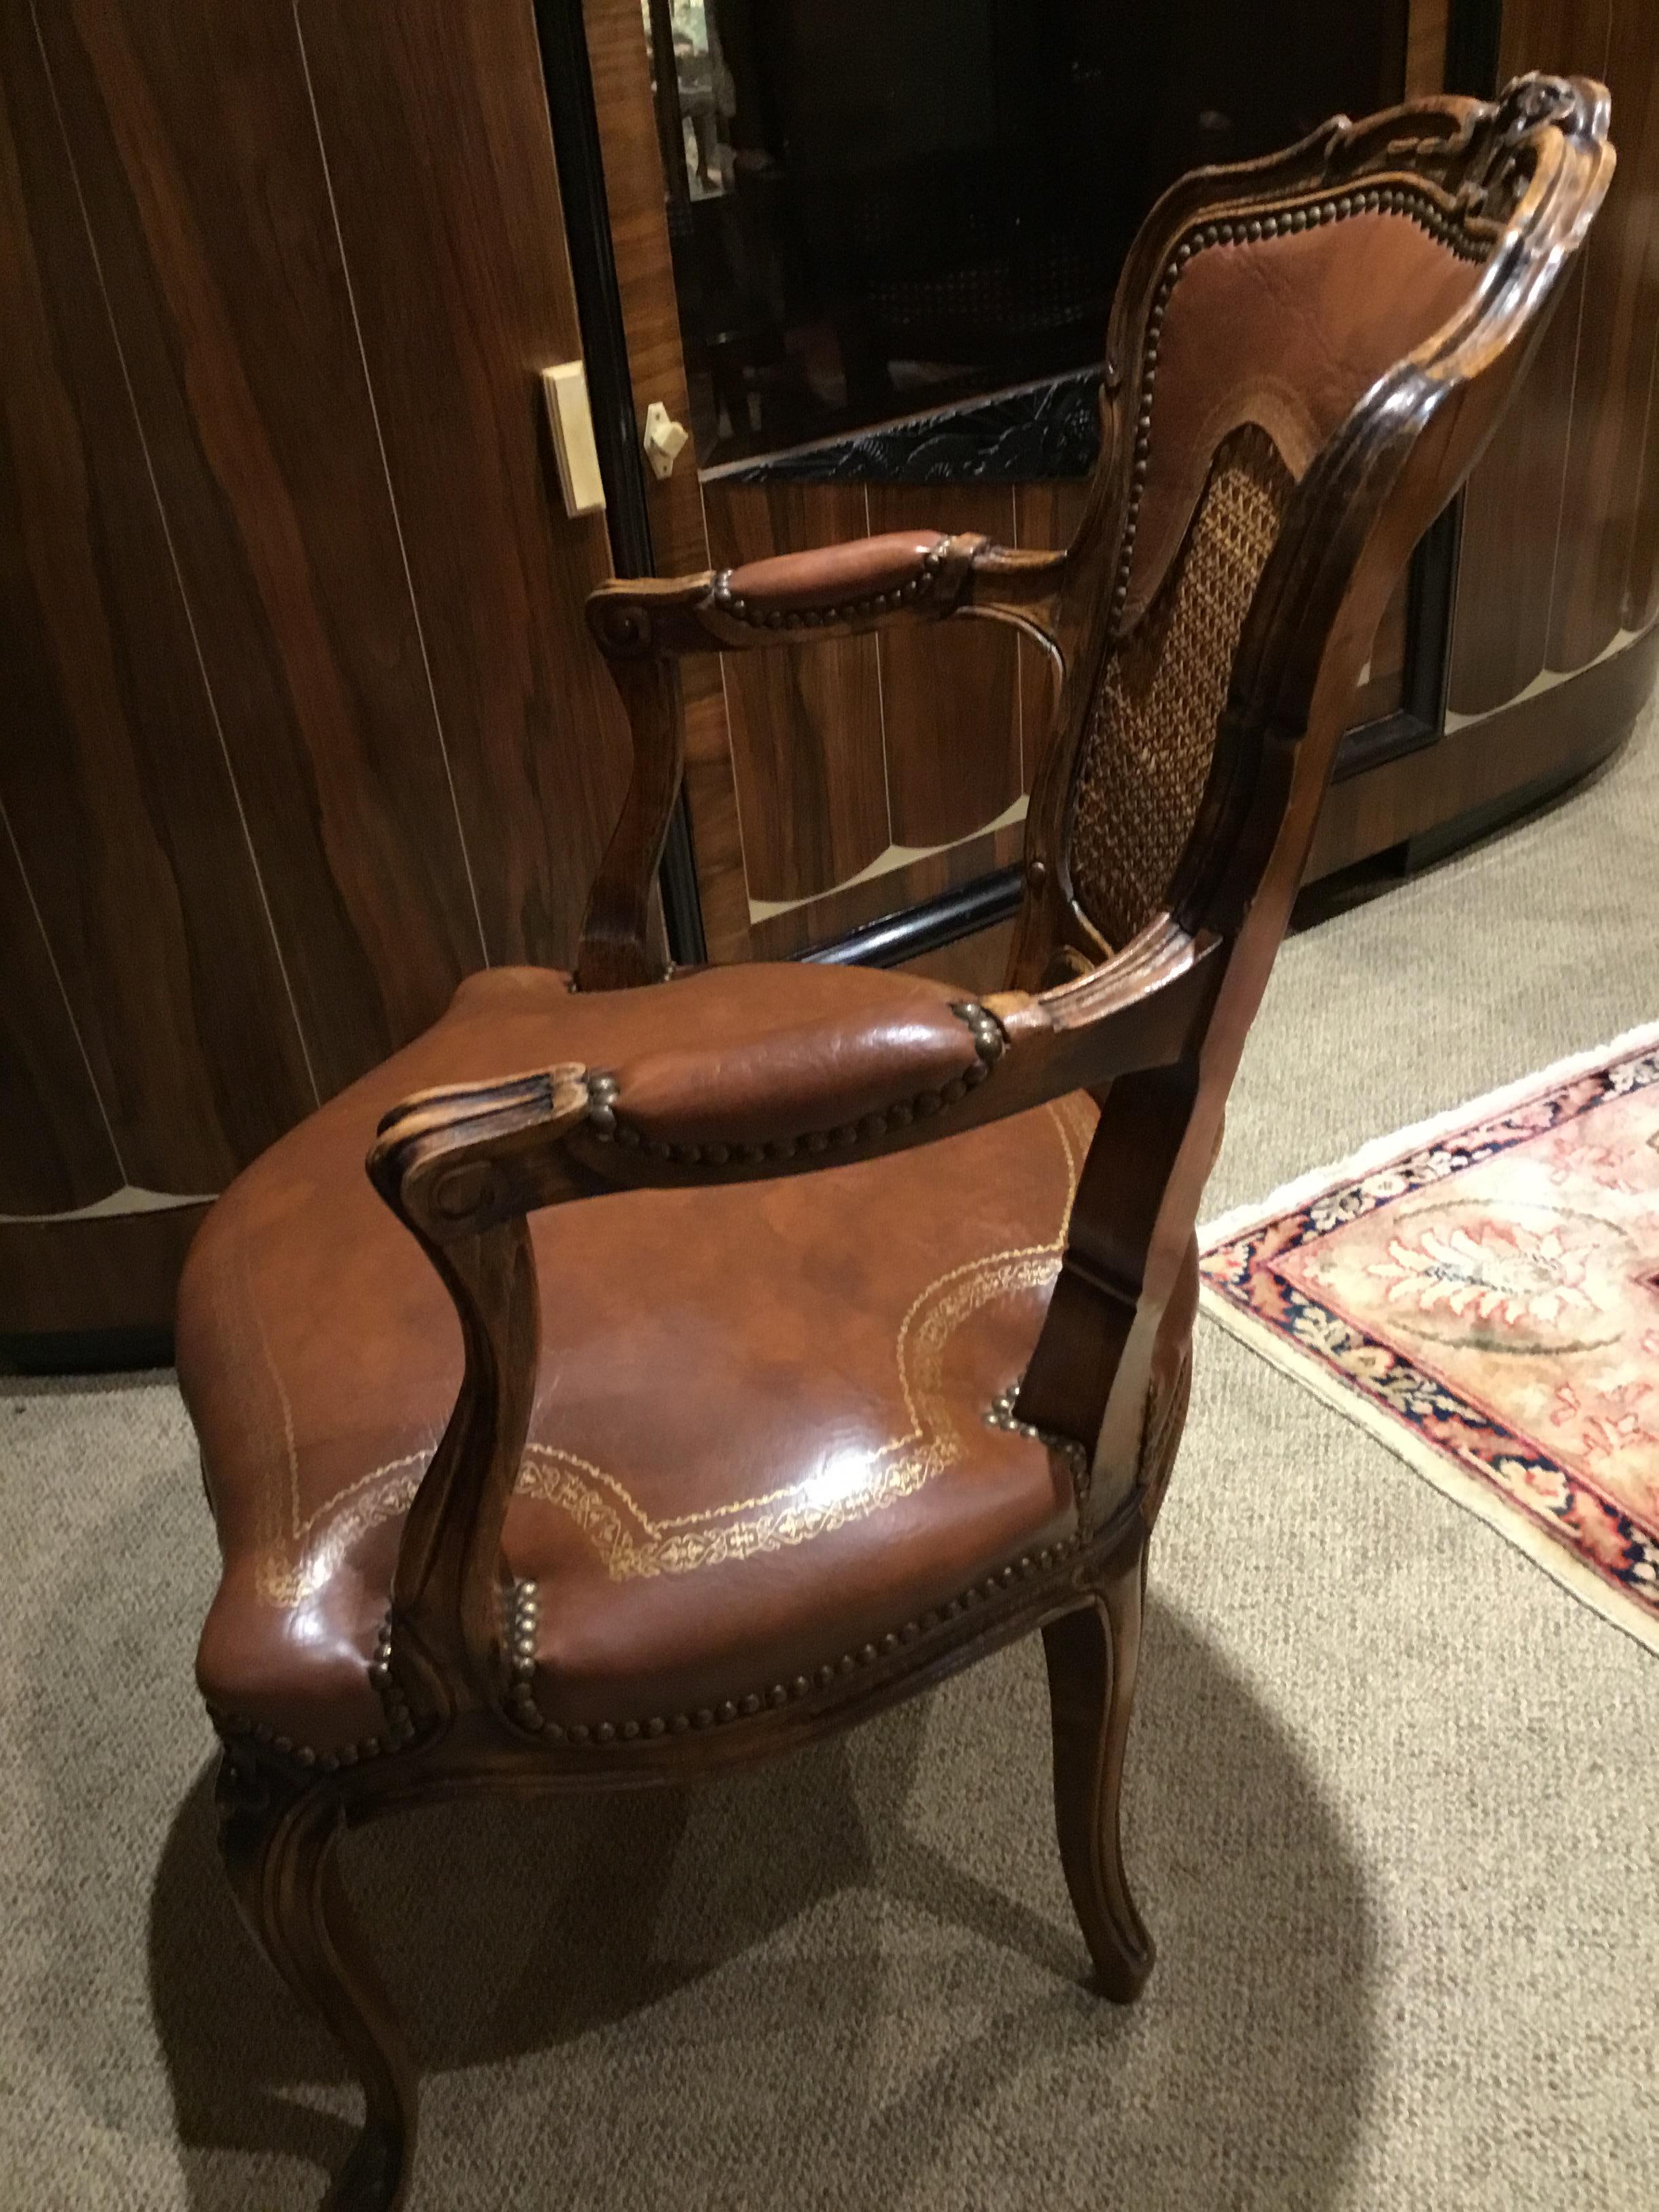 Excellent set of four chairs upholstered in leather with a cane back.
All very comfortable with good seat cushion and a curved back.
Carving at the center crest of the chairs with a floral and foliate
Motif and repeated at the center front seat